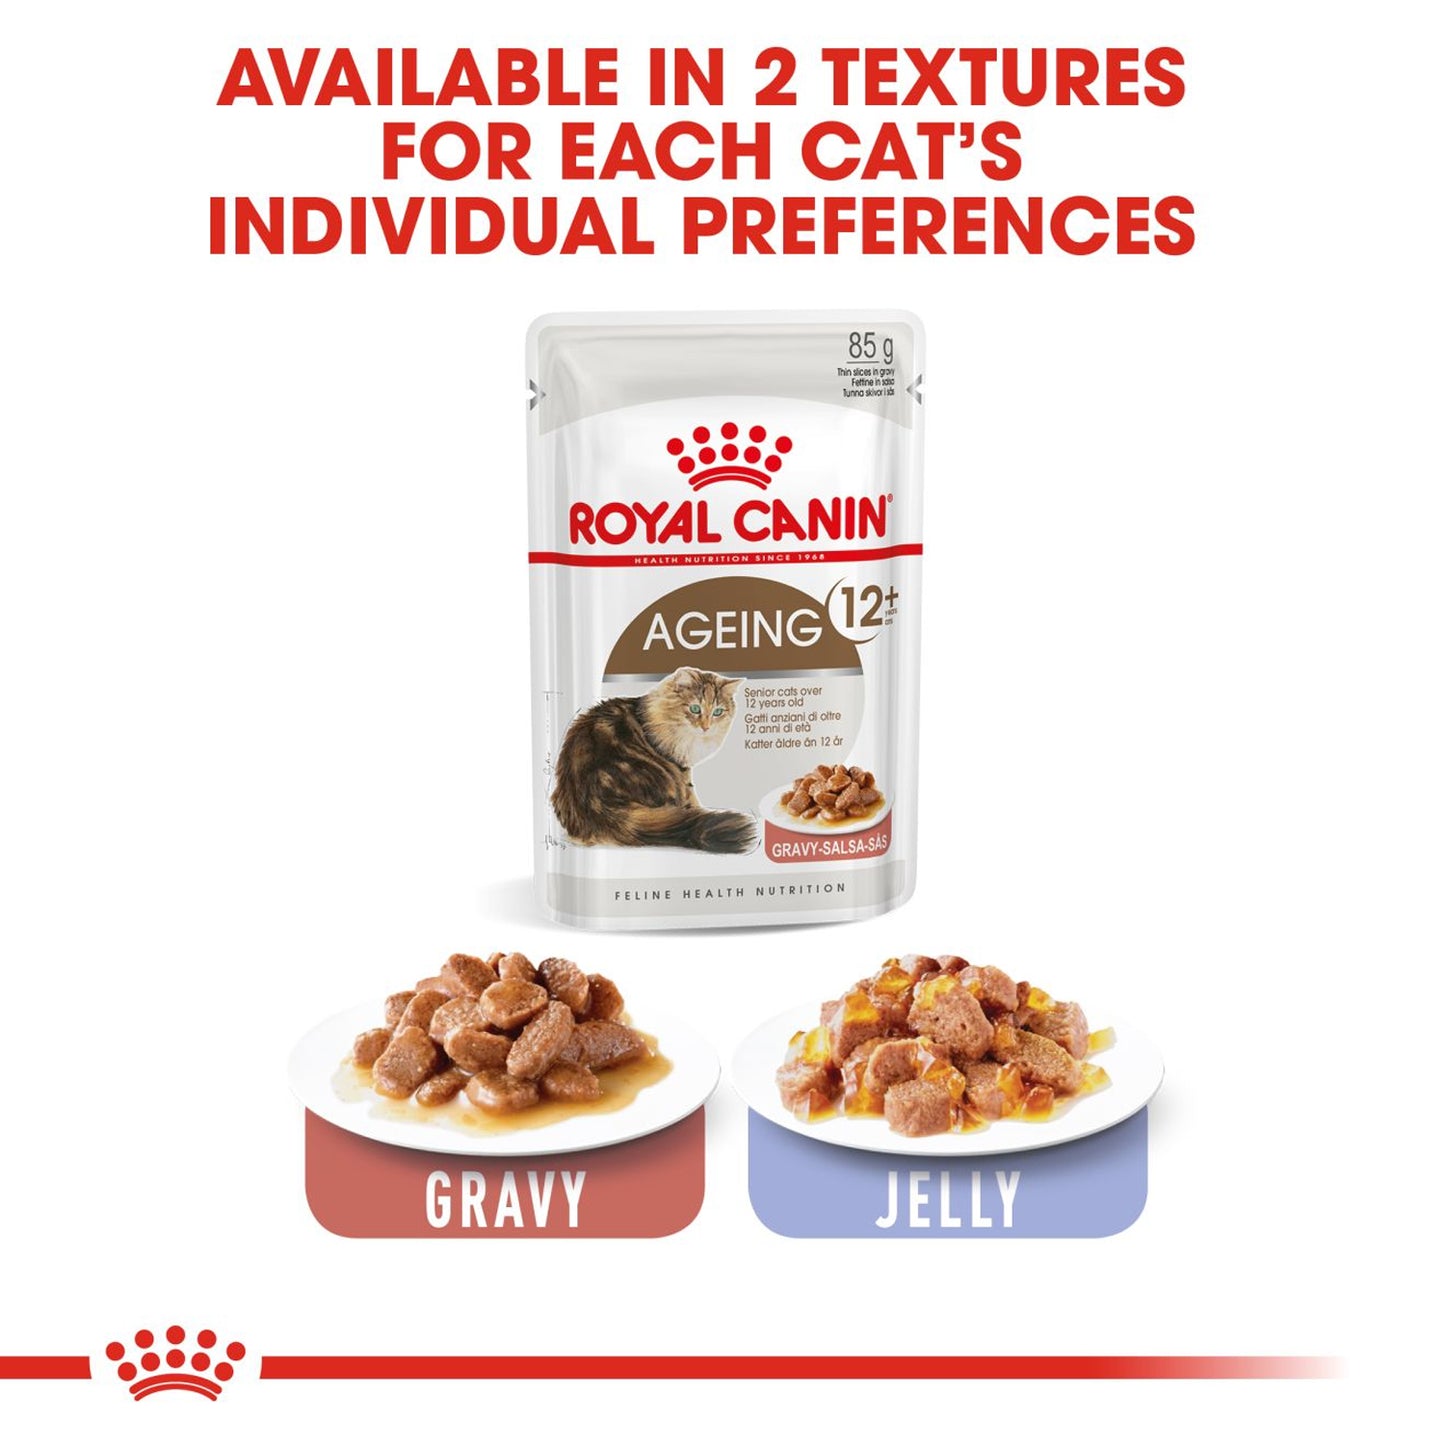 Royal Canin - Ageing +12 Wet Cat Food